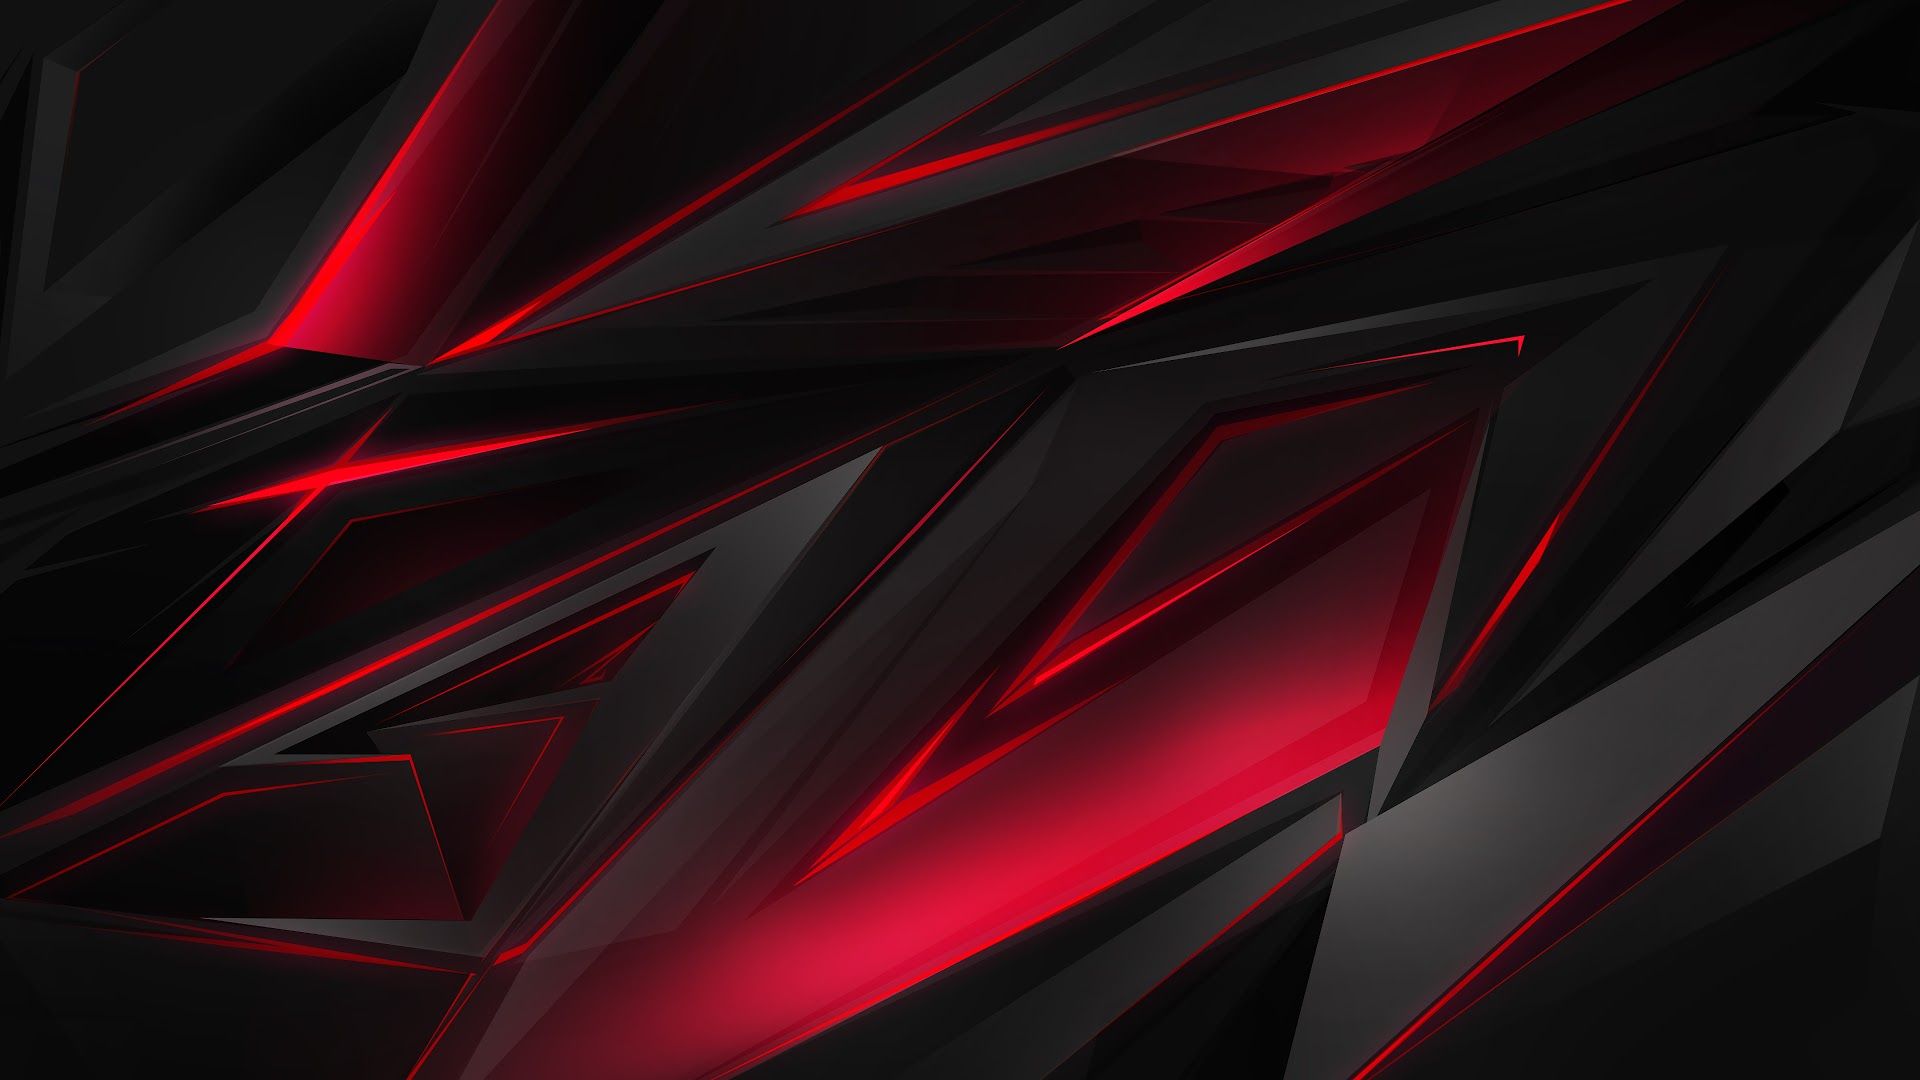 Most popular 14 black and red wallpaper latest Update